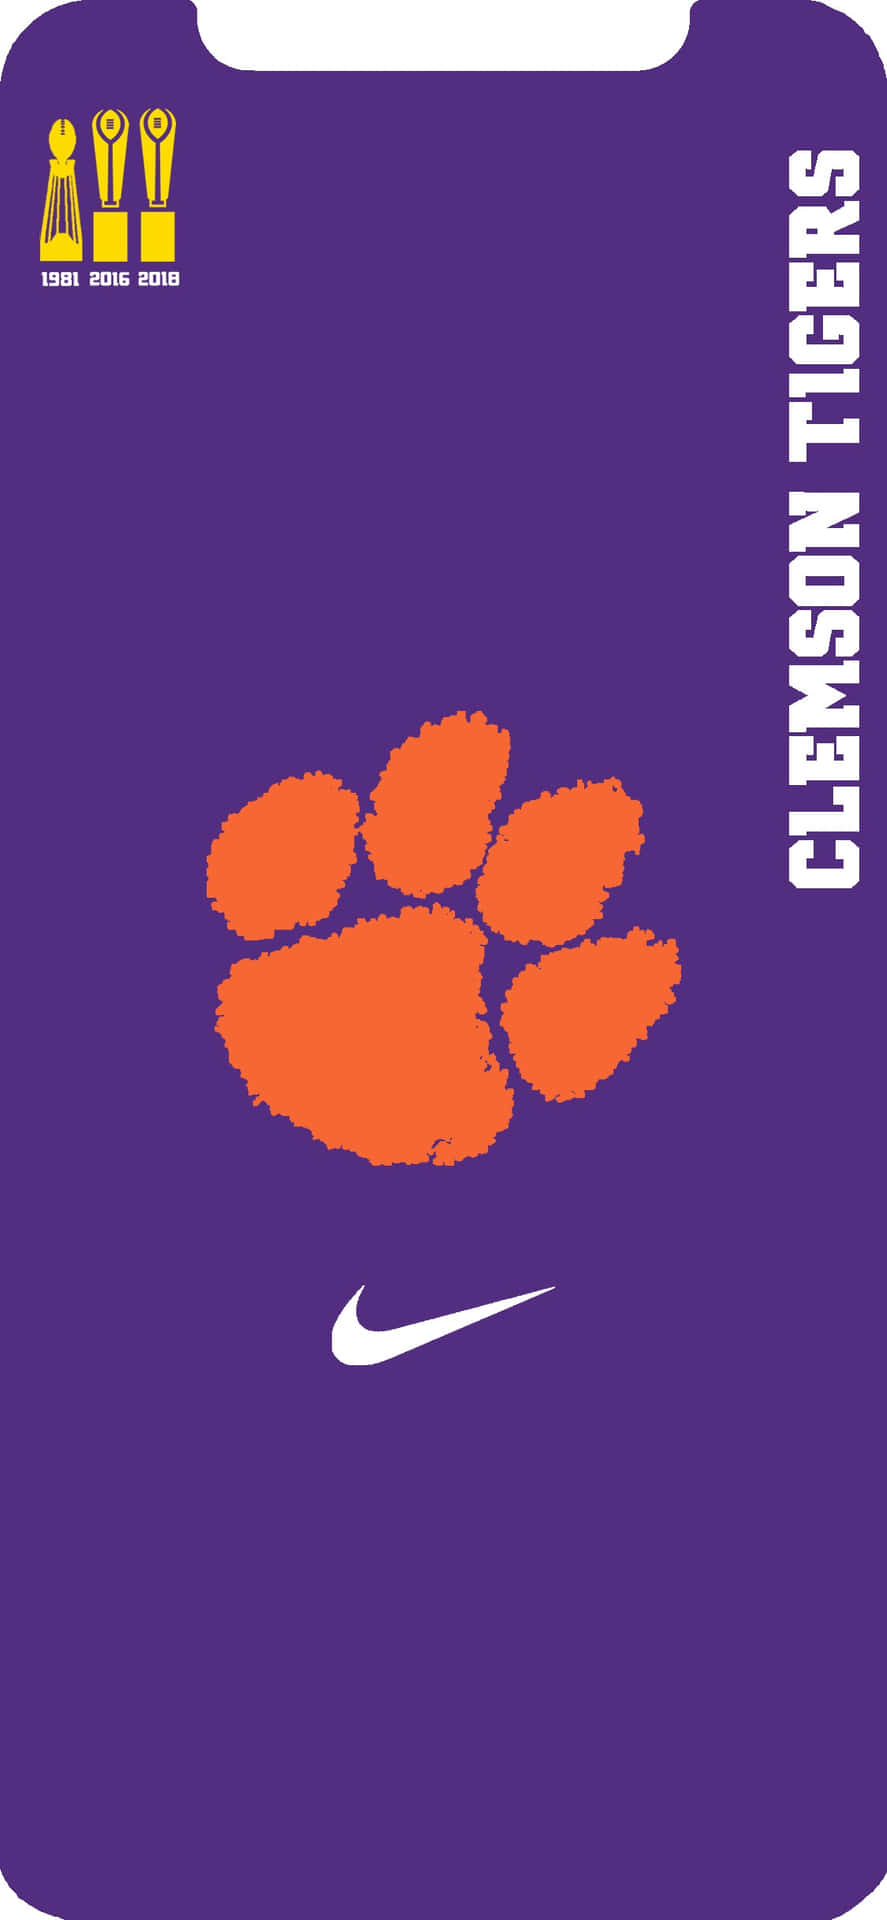 Show your Clemson pride with this sleek and stylish iPhone Wallpaper